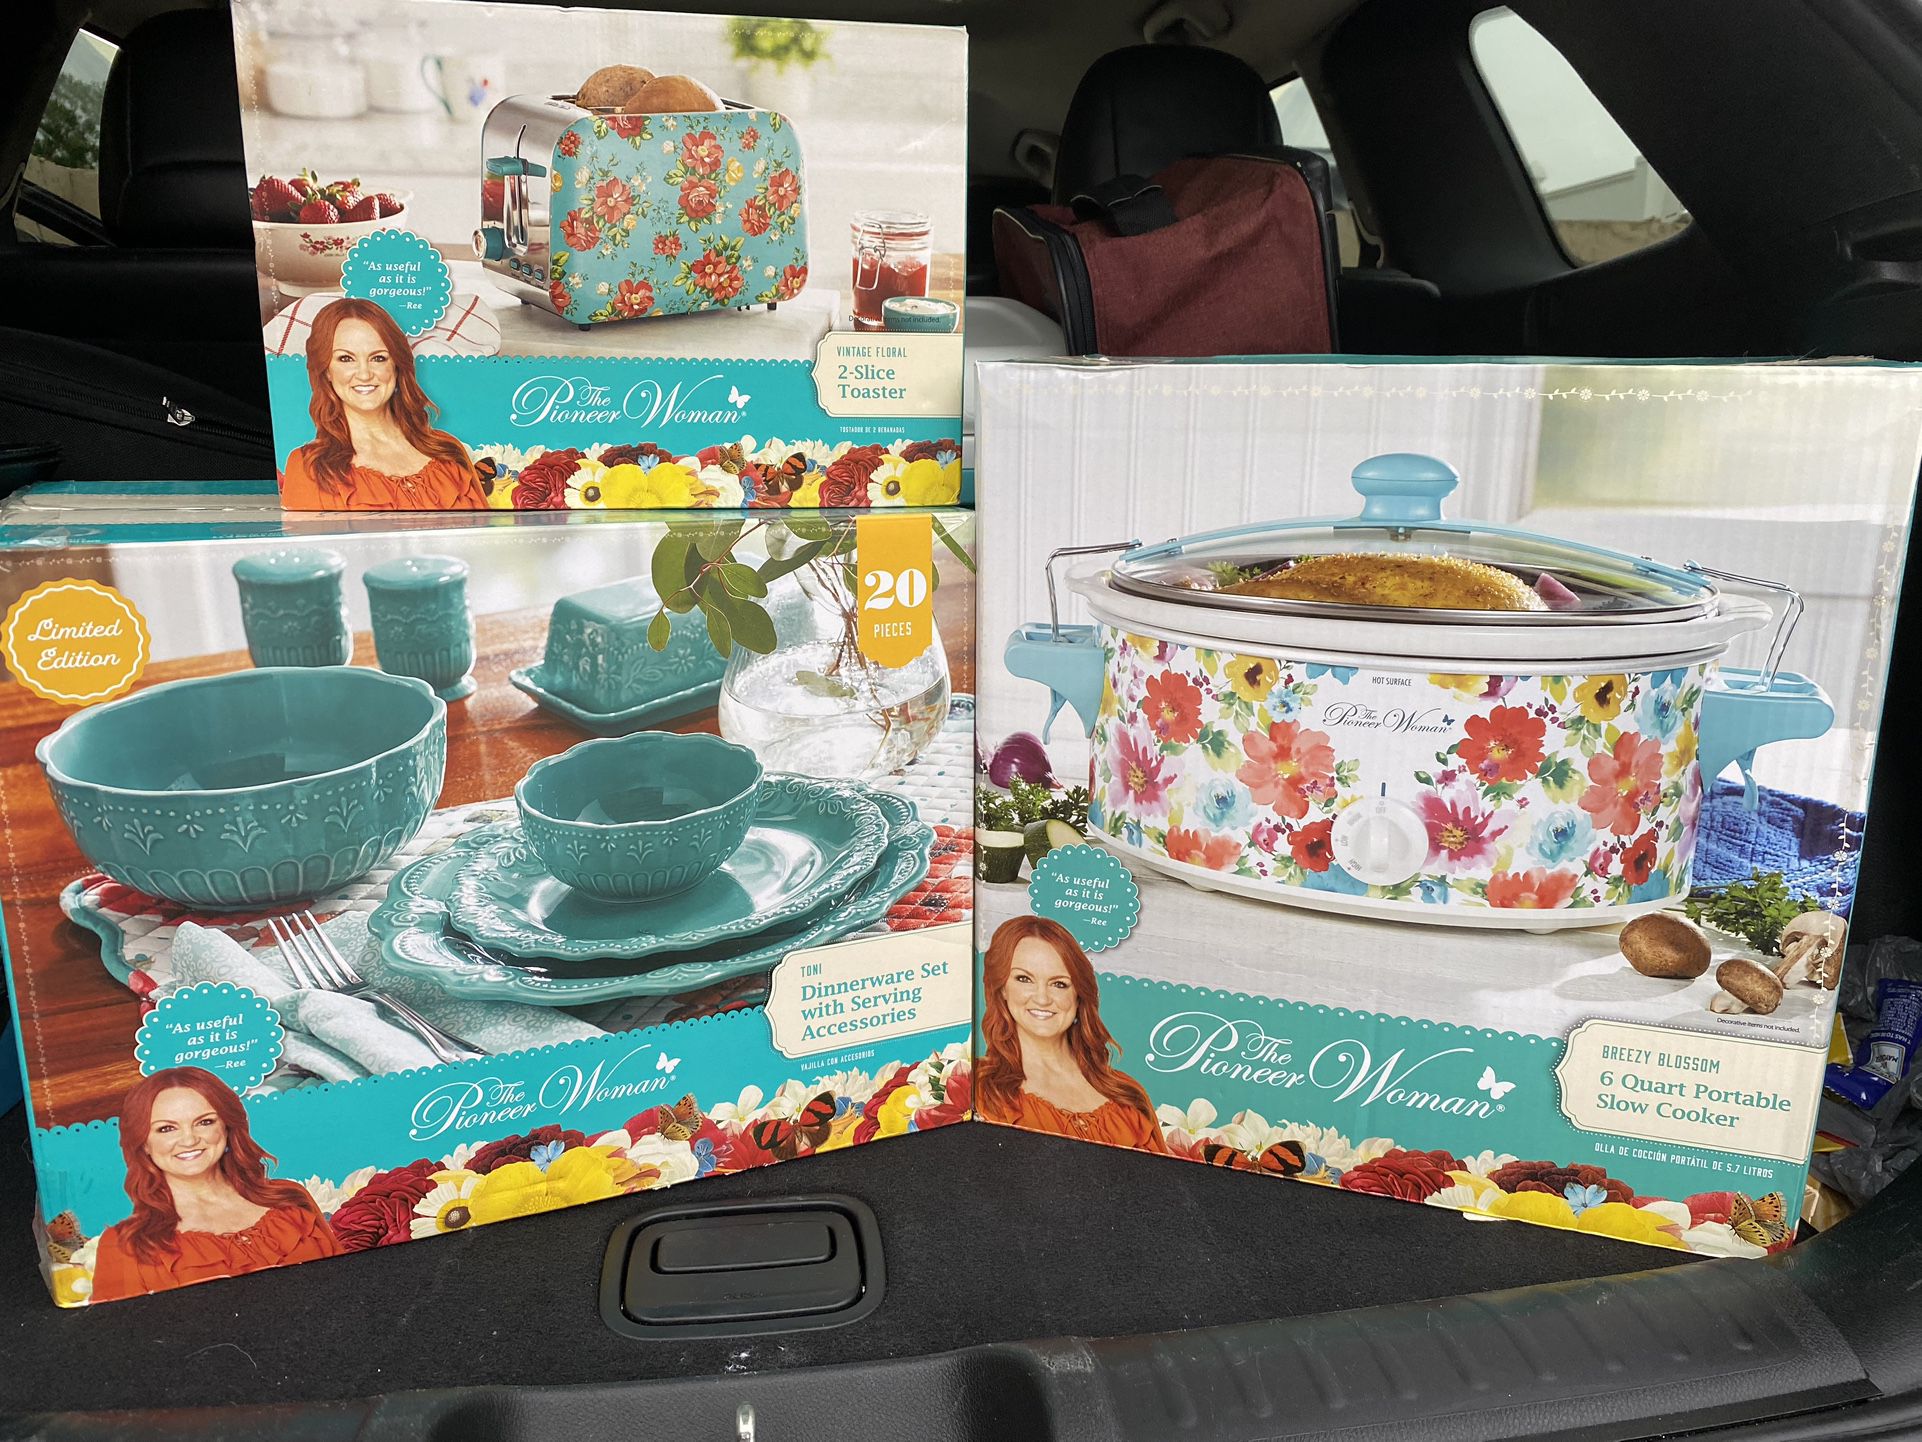 The Pioneer Woman Kitchen Set